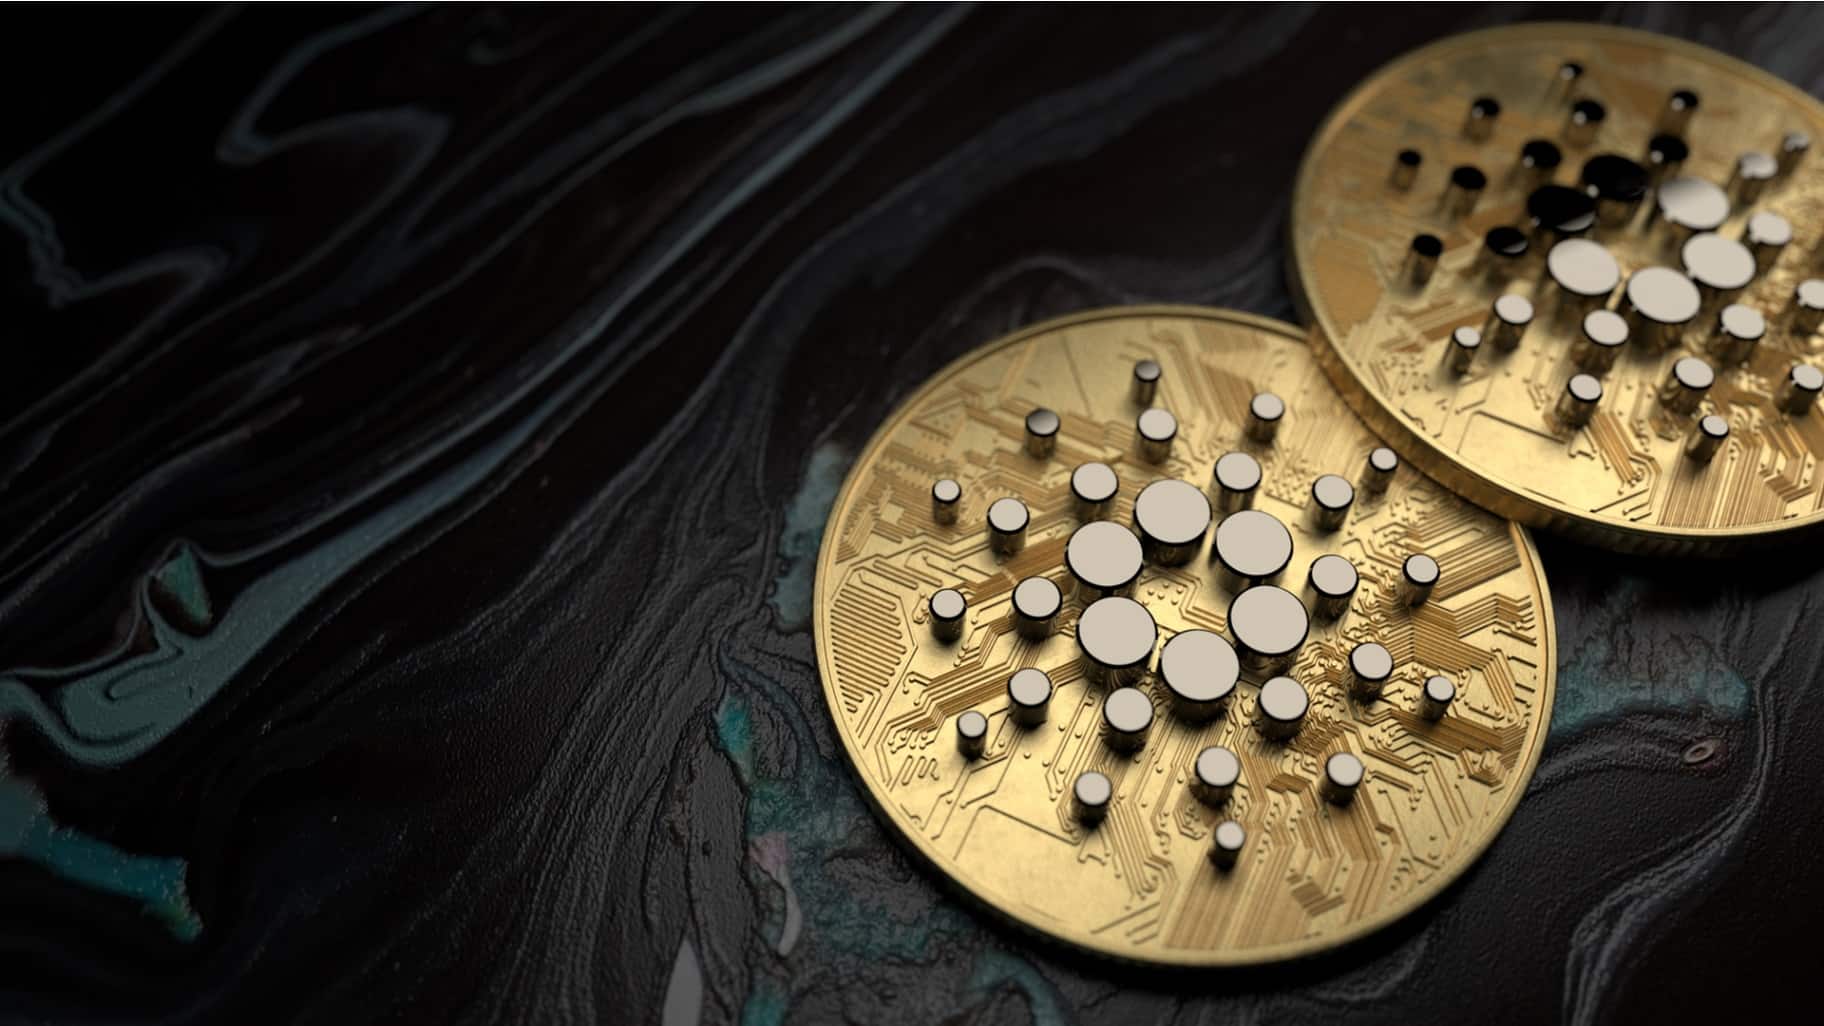 Cardano launches the most ambitious project – it will have its own stablecoin!